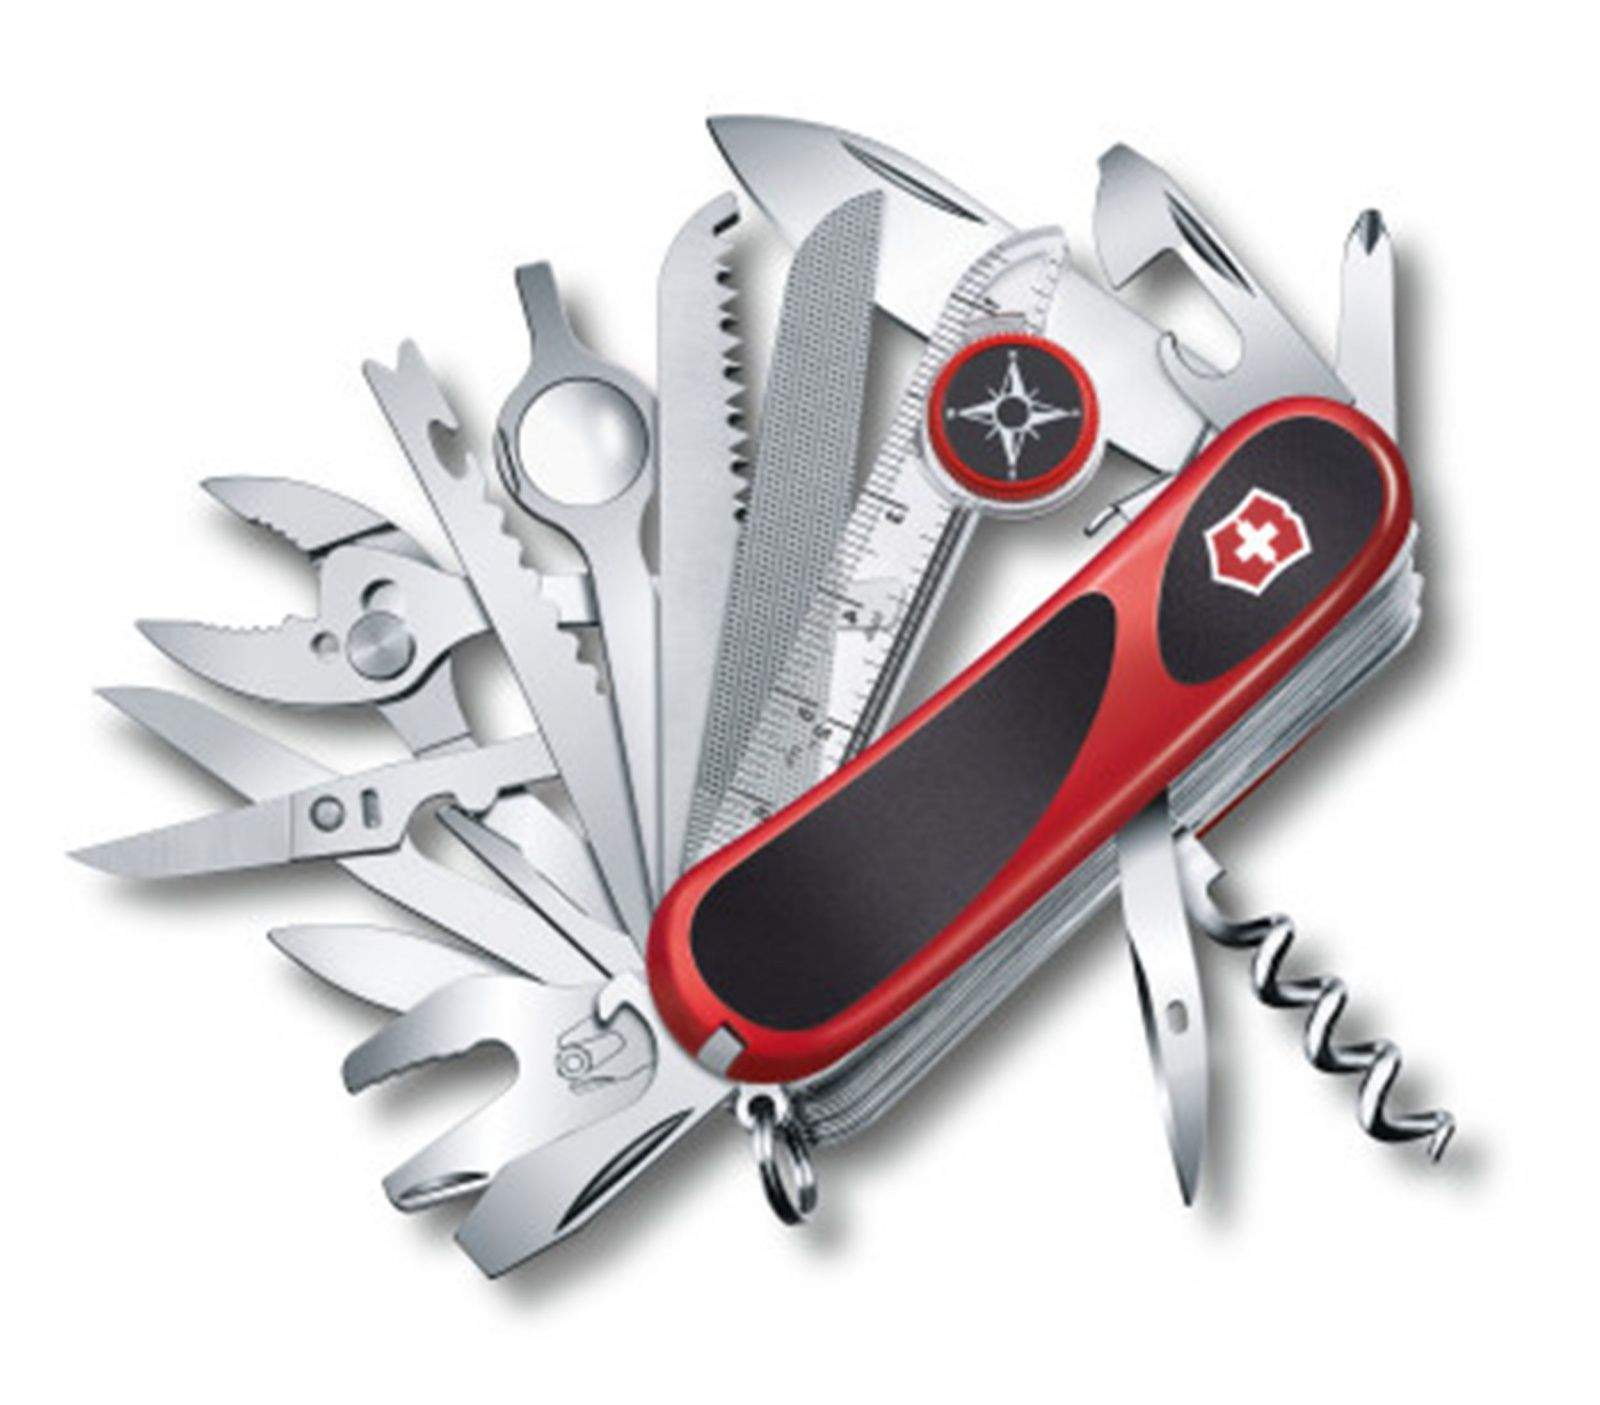 Army Knife Pictures A modern Swiss Army Knife, the EvoGrip S54, features 31 implements.